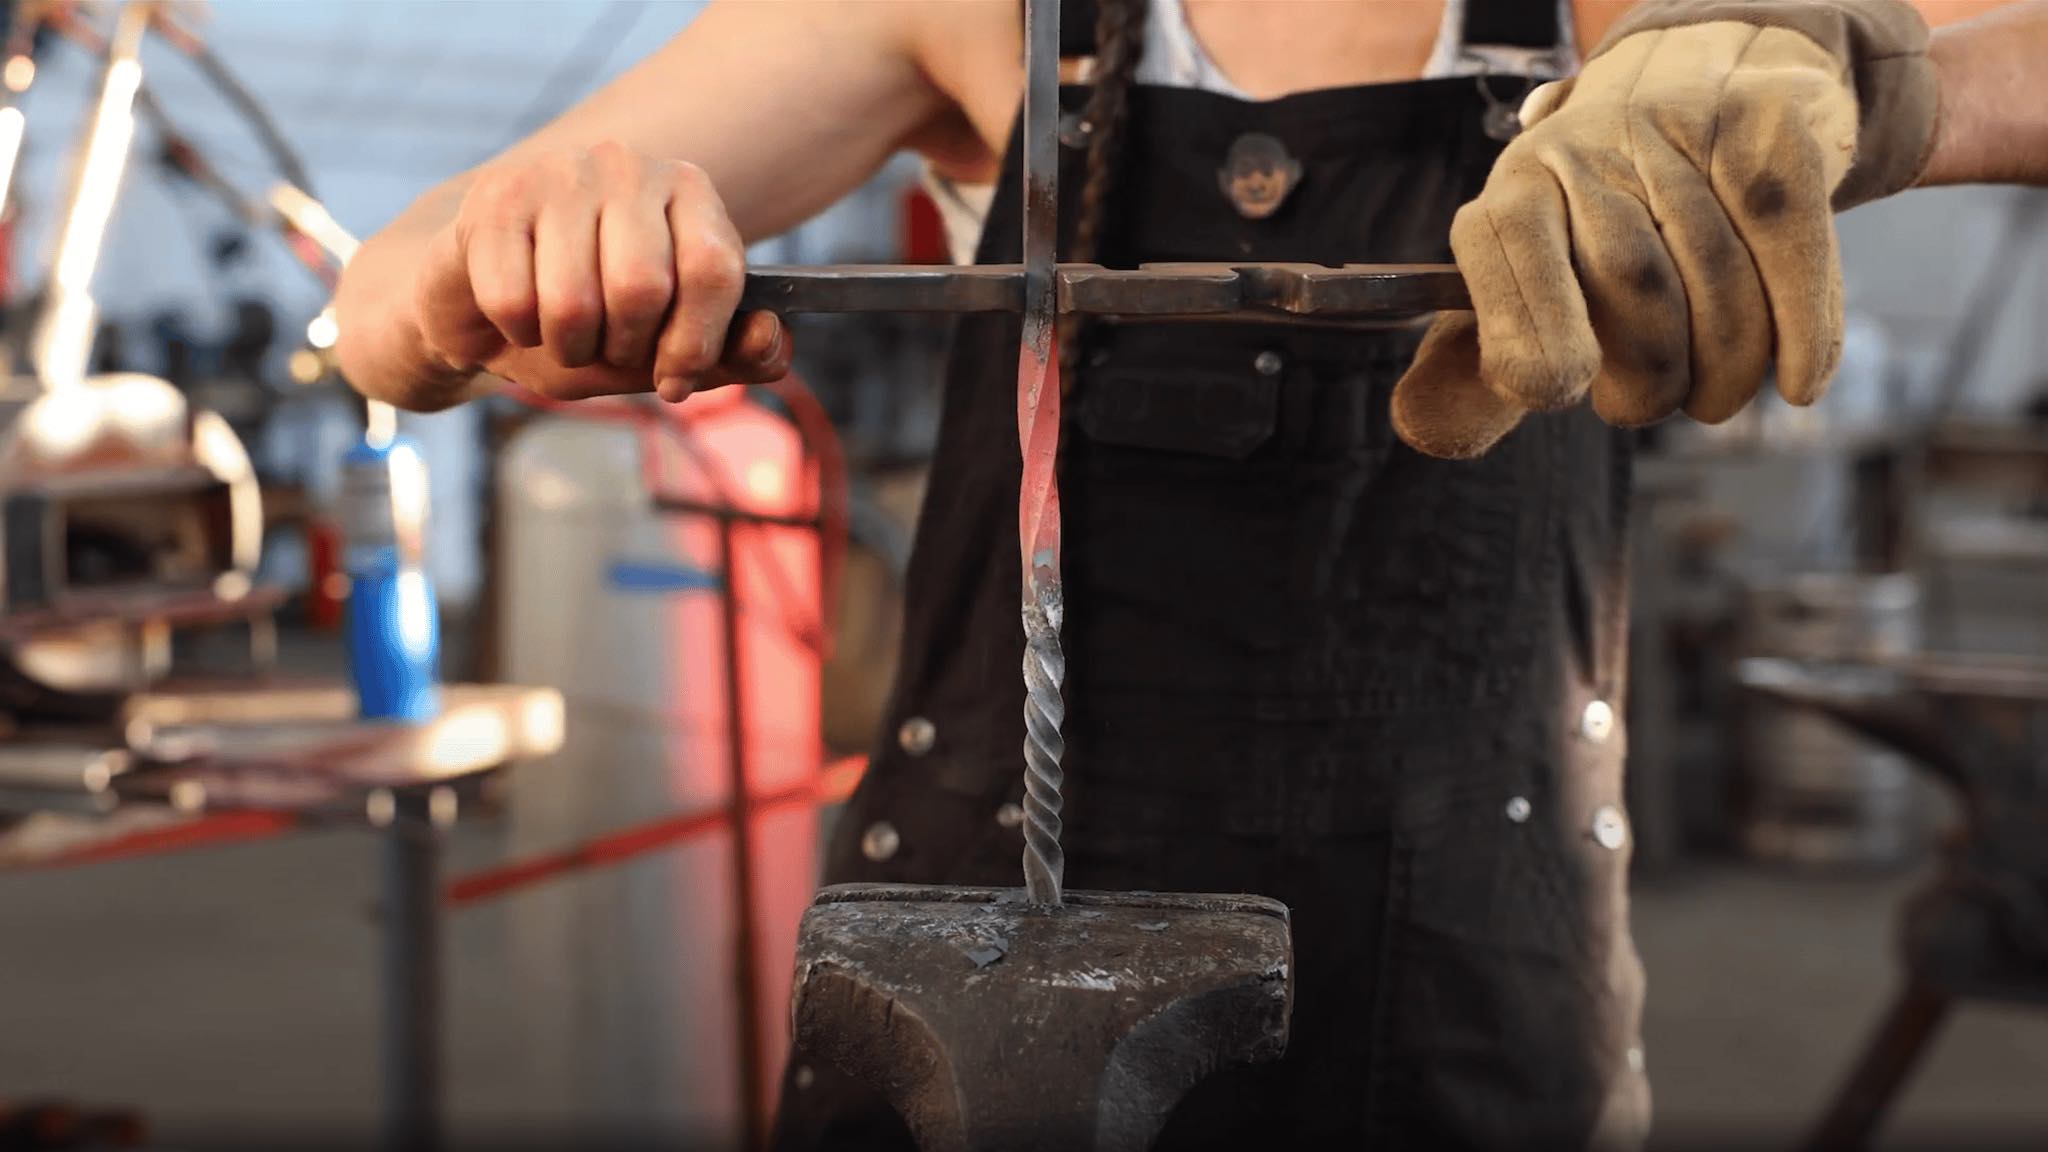 Heather McLarty demonstrating reverse twisting on a red-hot, forge-heated iron bar secured in a vise at Adam's Forge in Los Angeles, California. Photo by David Haskell.